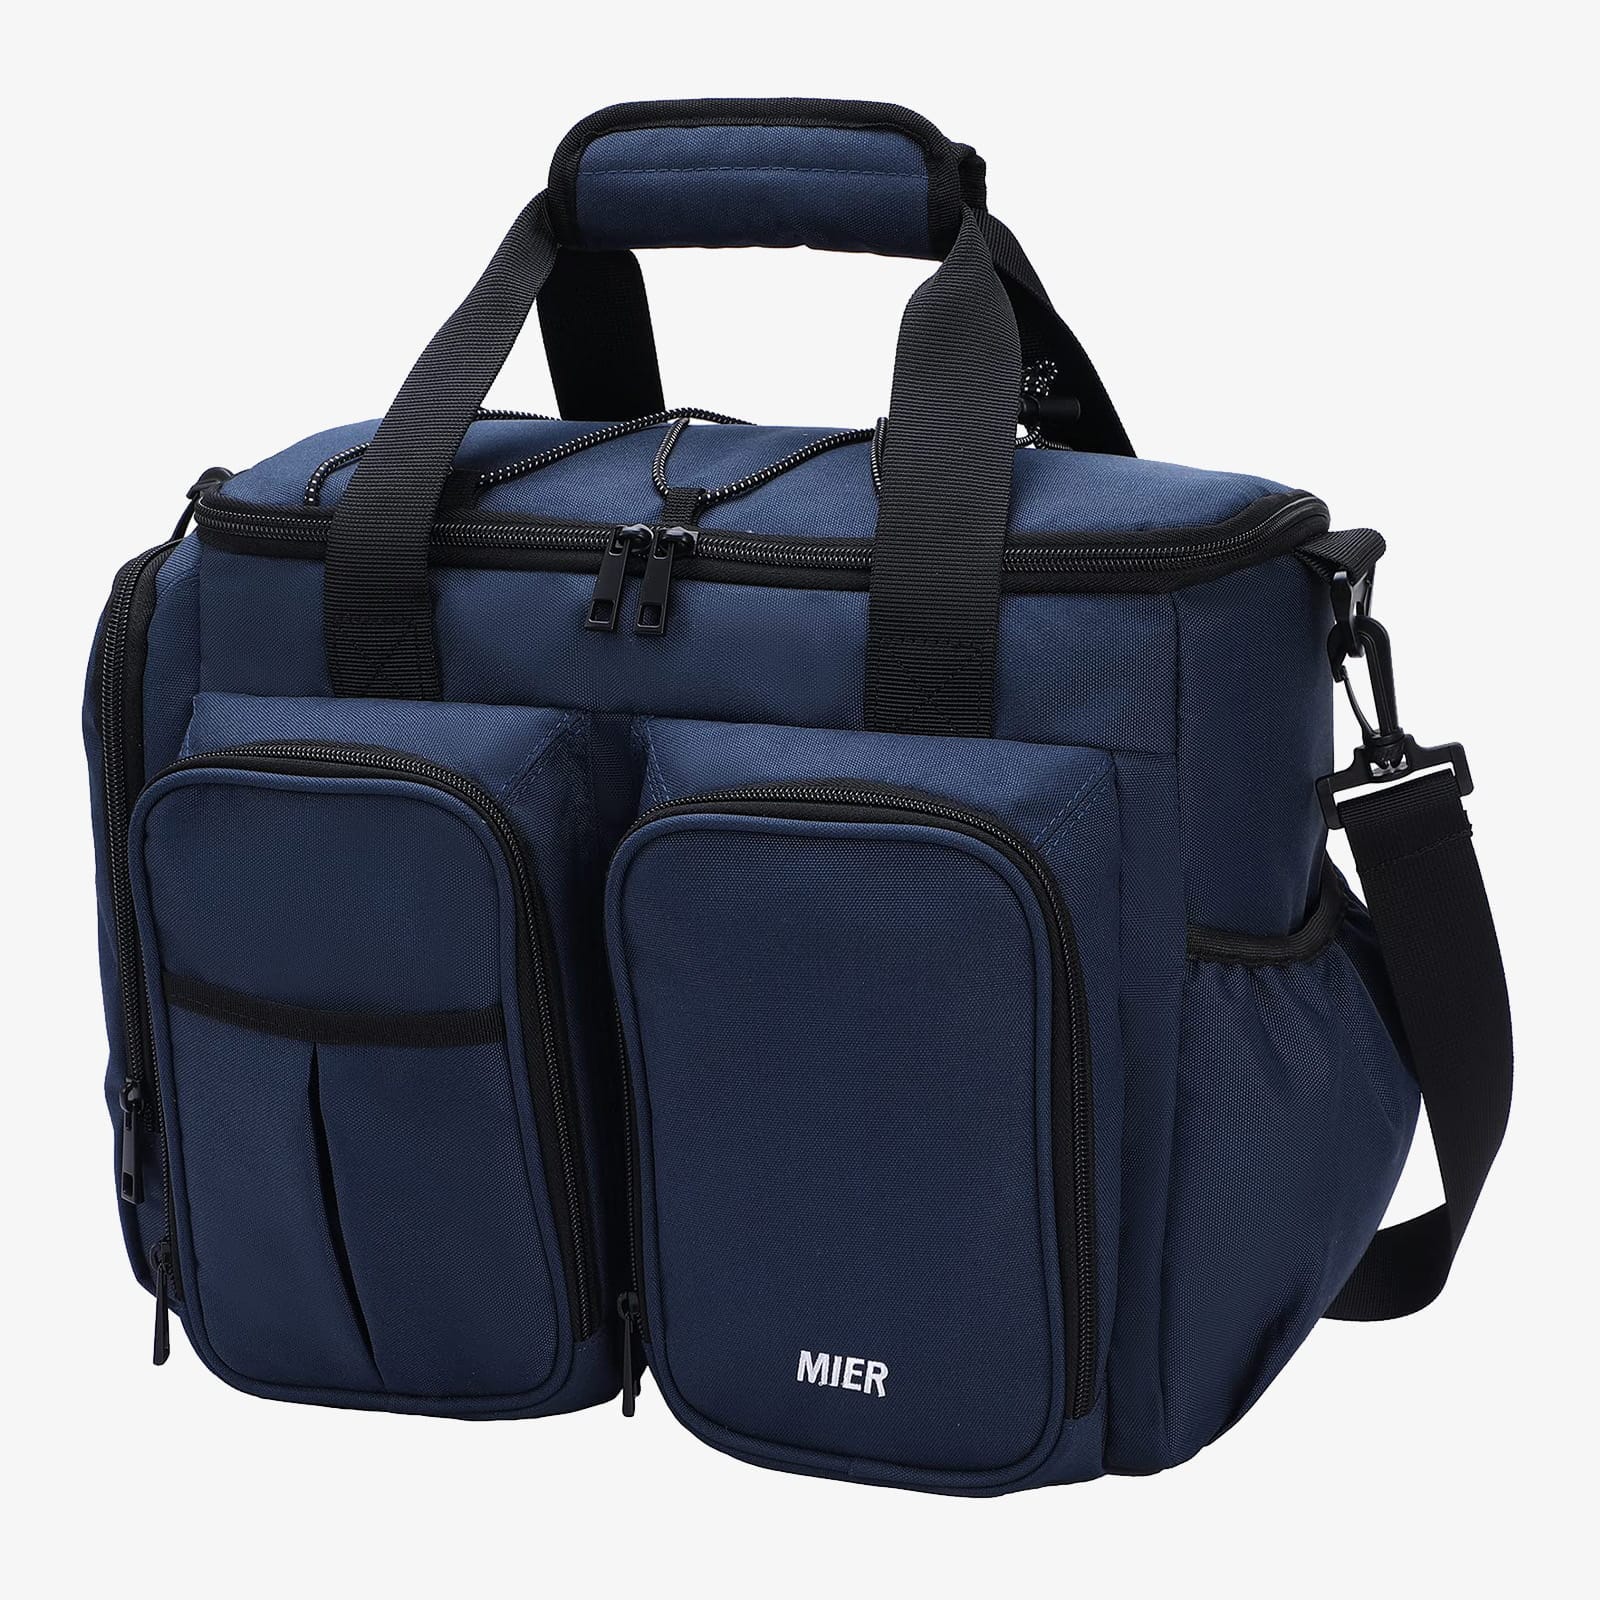 Large Insulated Lunch Cooler Bag with Multiple Pockets - Navy